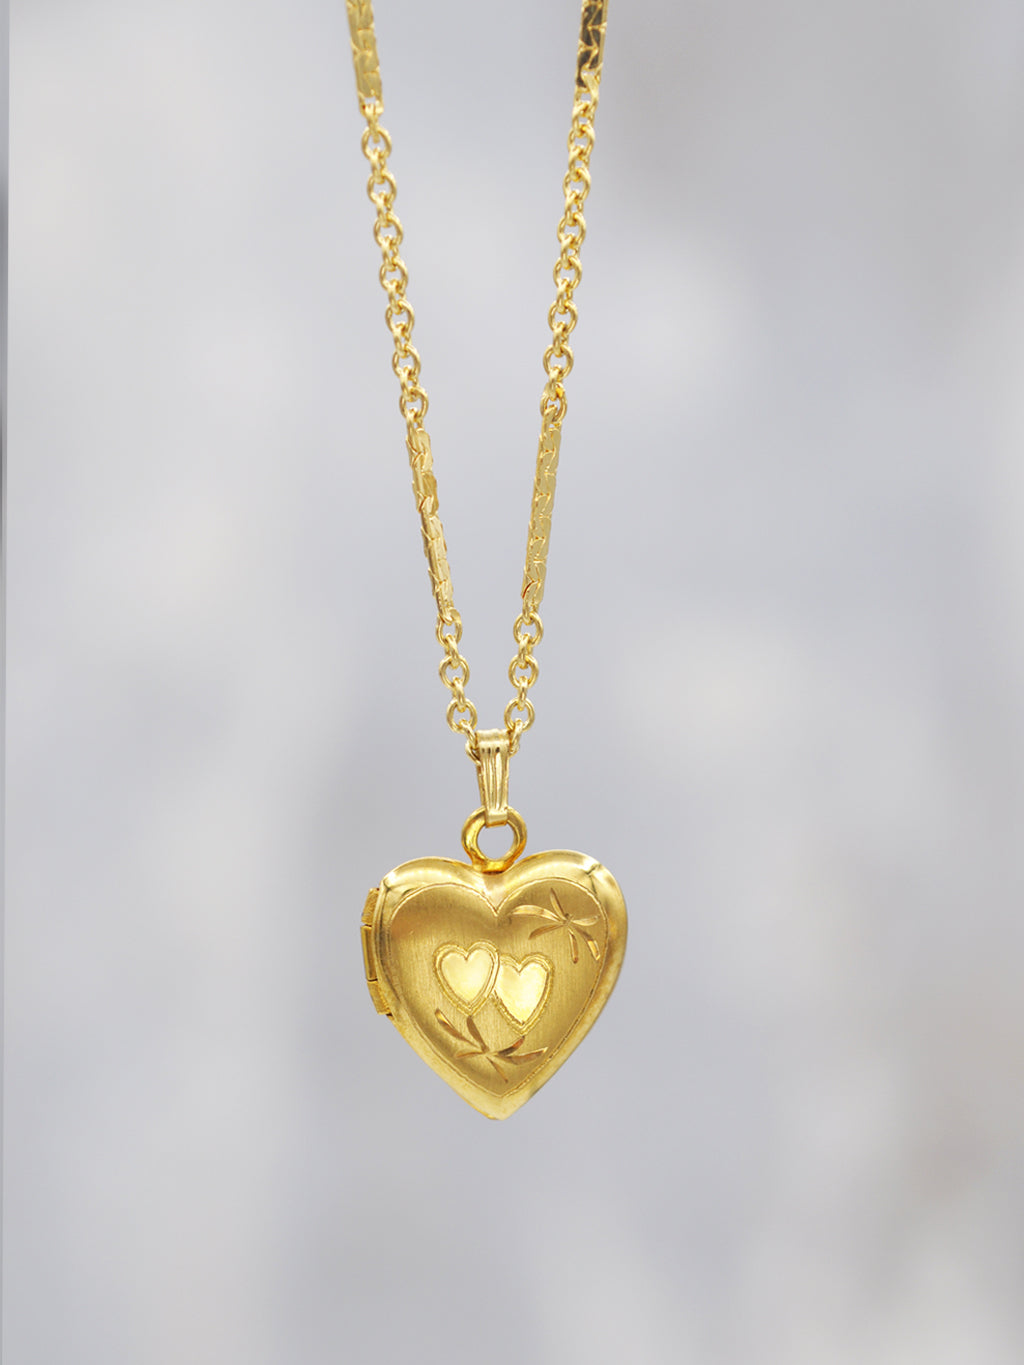 Heartstring Gold Locket Necklace - Penny Pairs